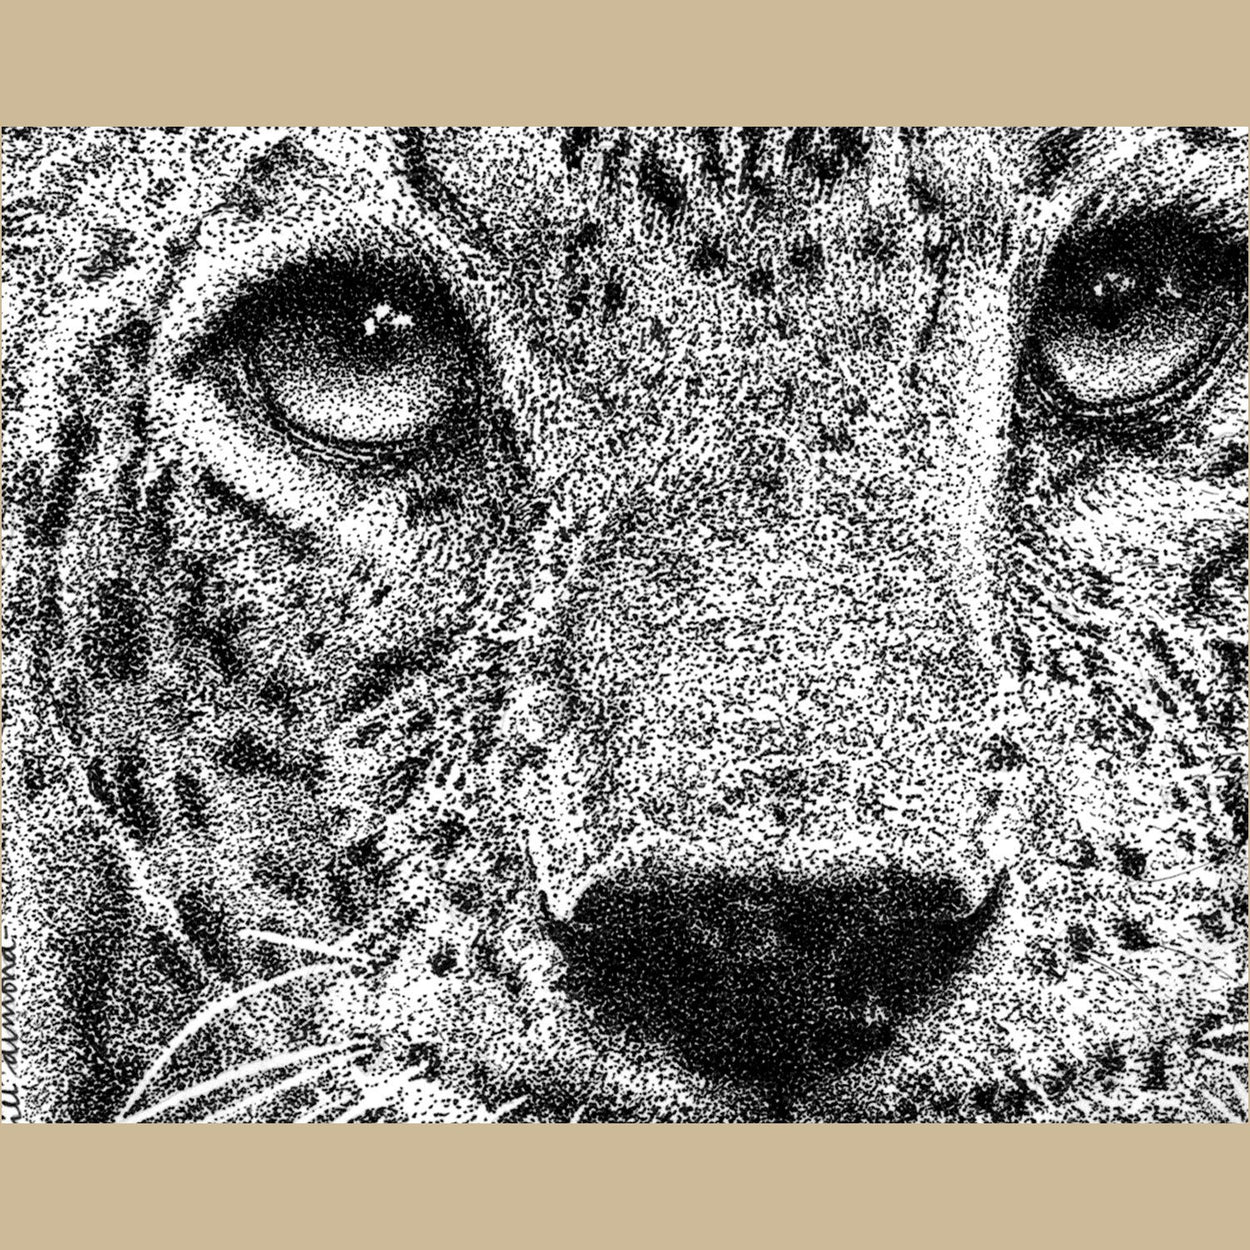 Leopard Pen Stippling Close-Up - The Thriving Wild